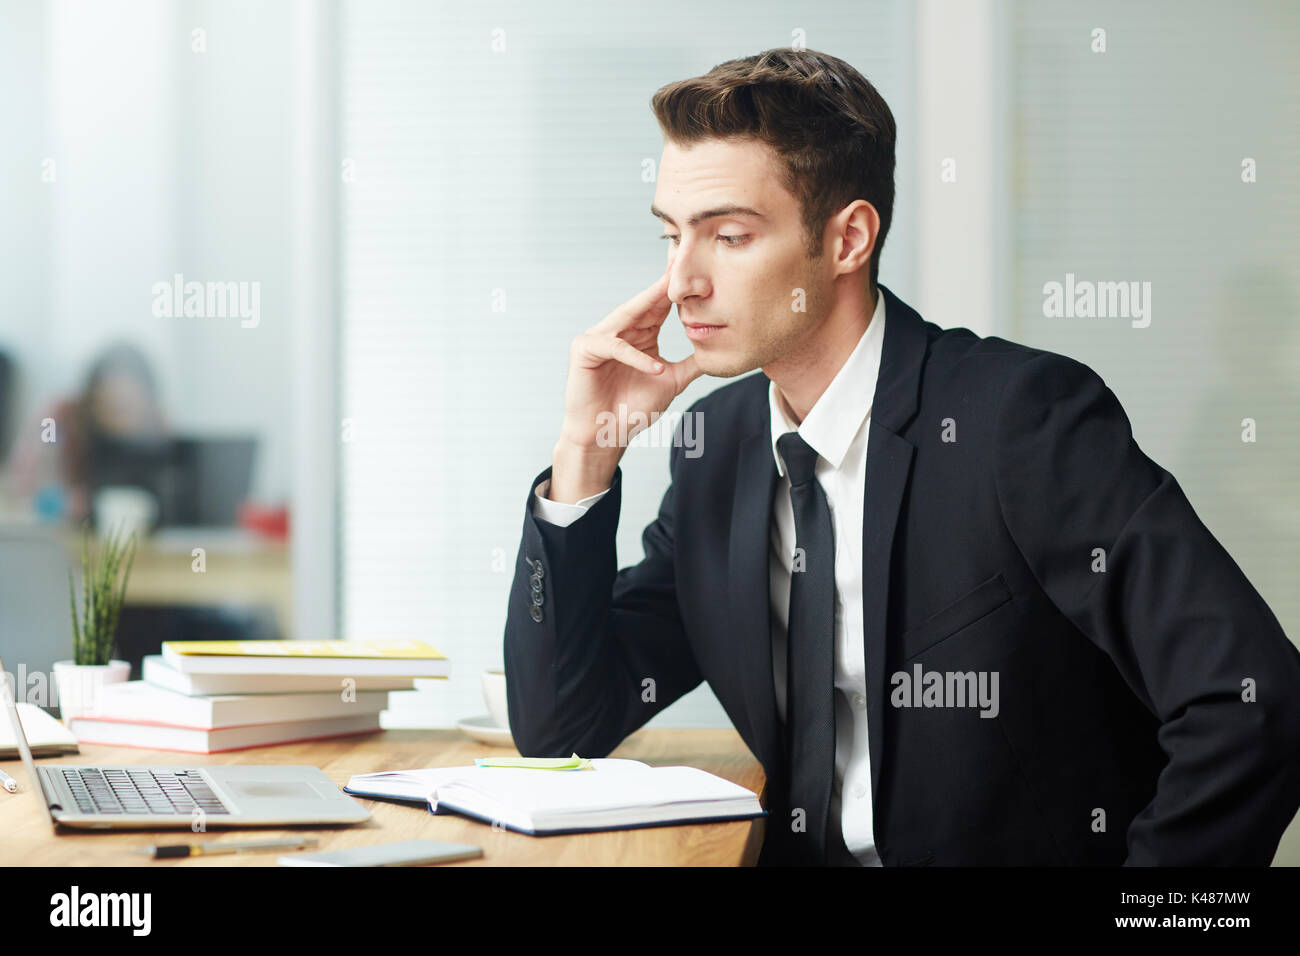 Analyst at workplace Stock Photo